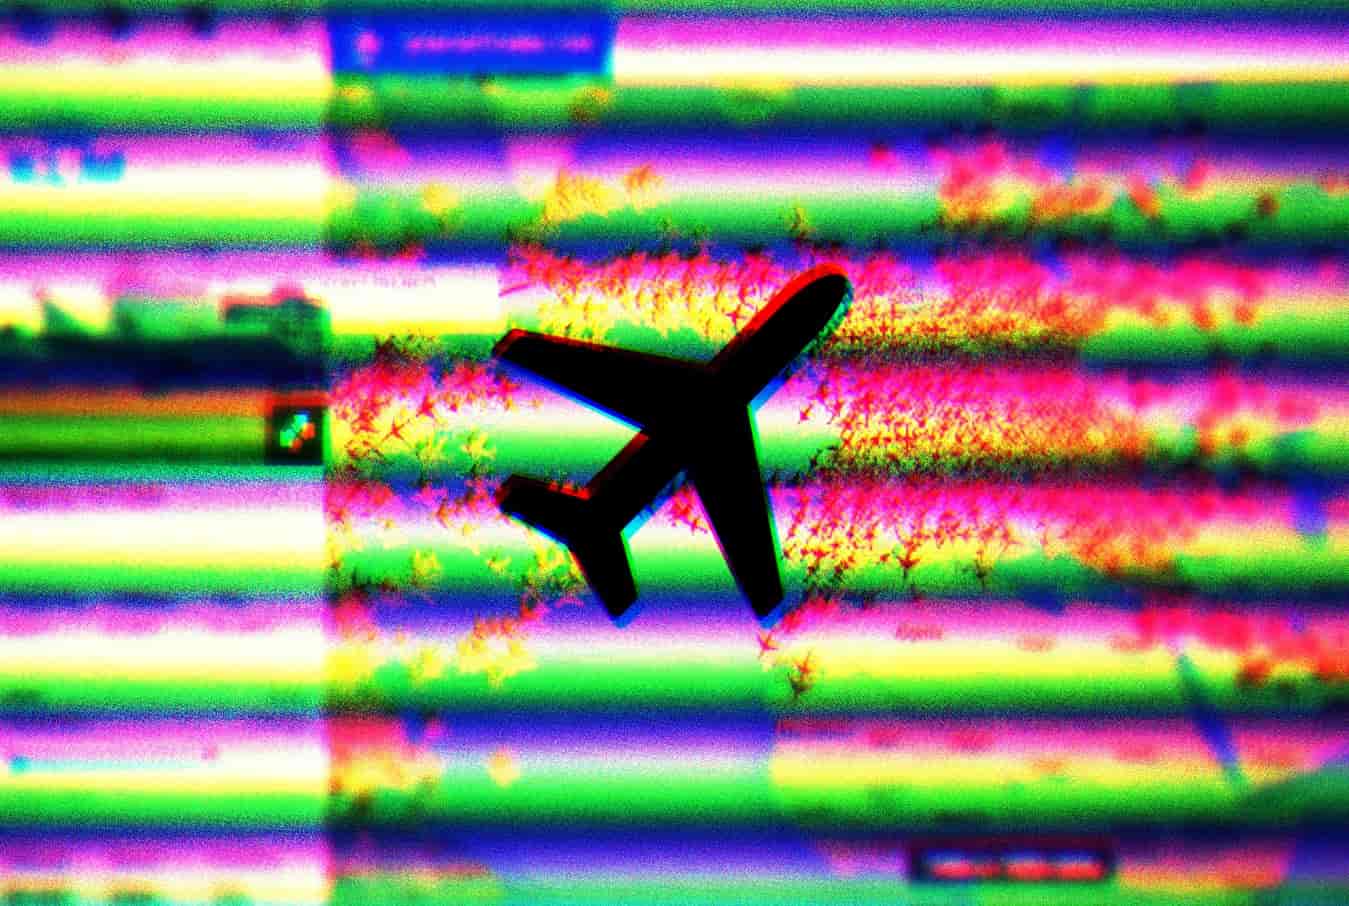 Two major flight tracking services hit by crippling cyberattacks